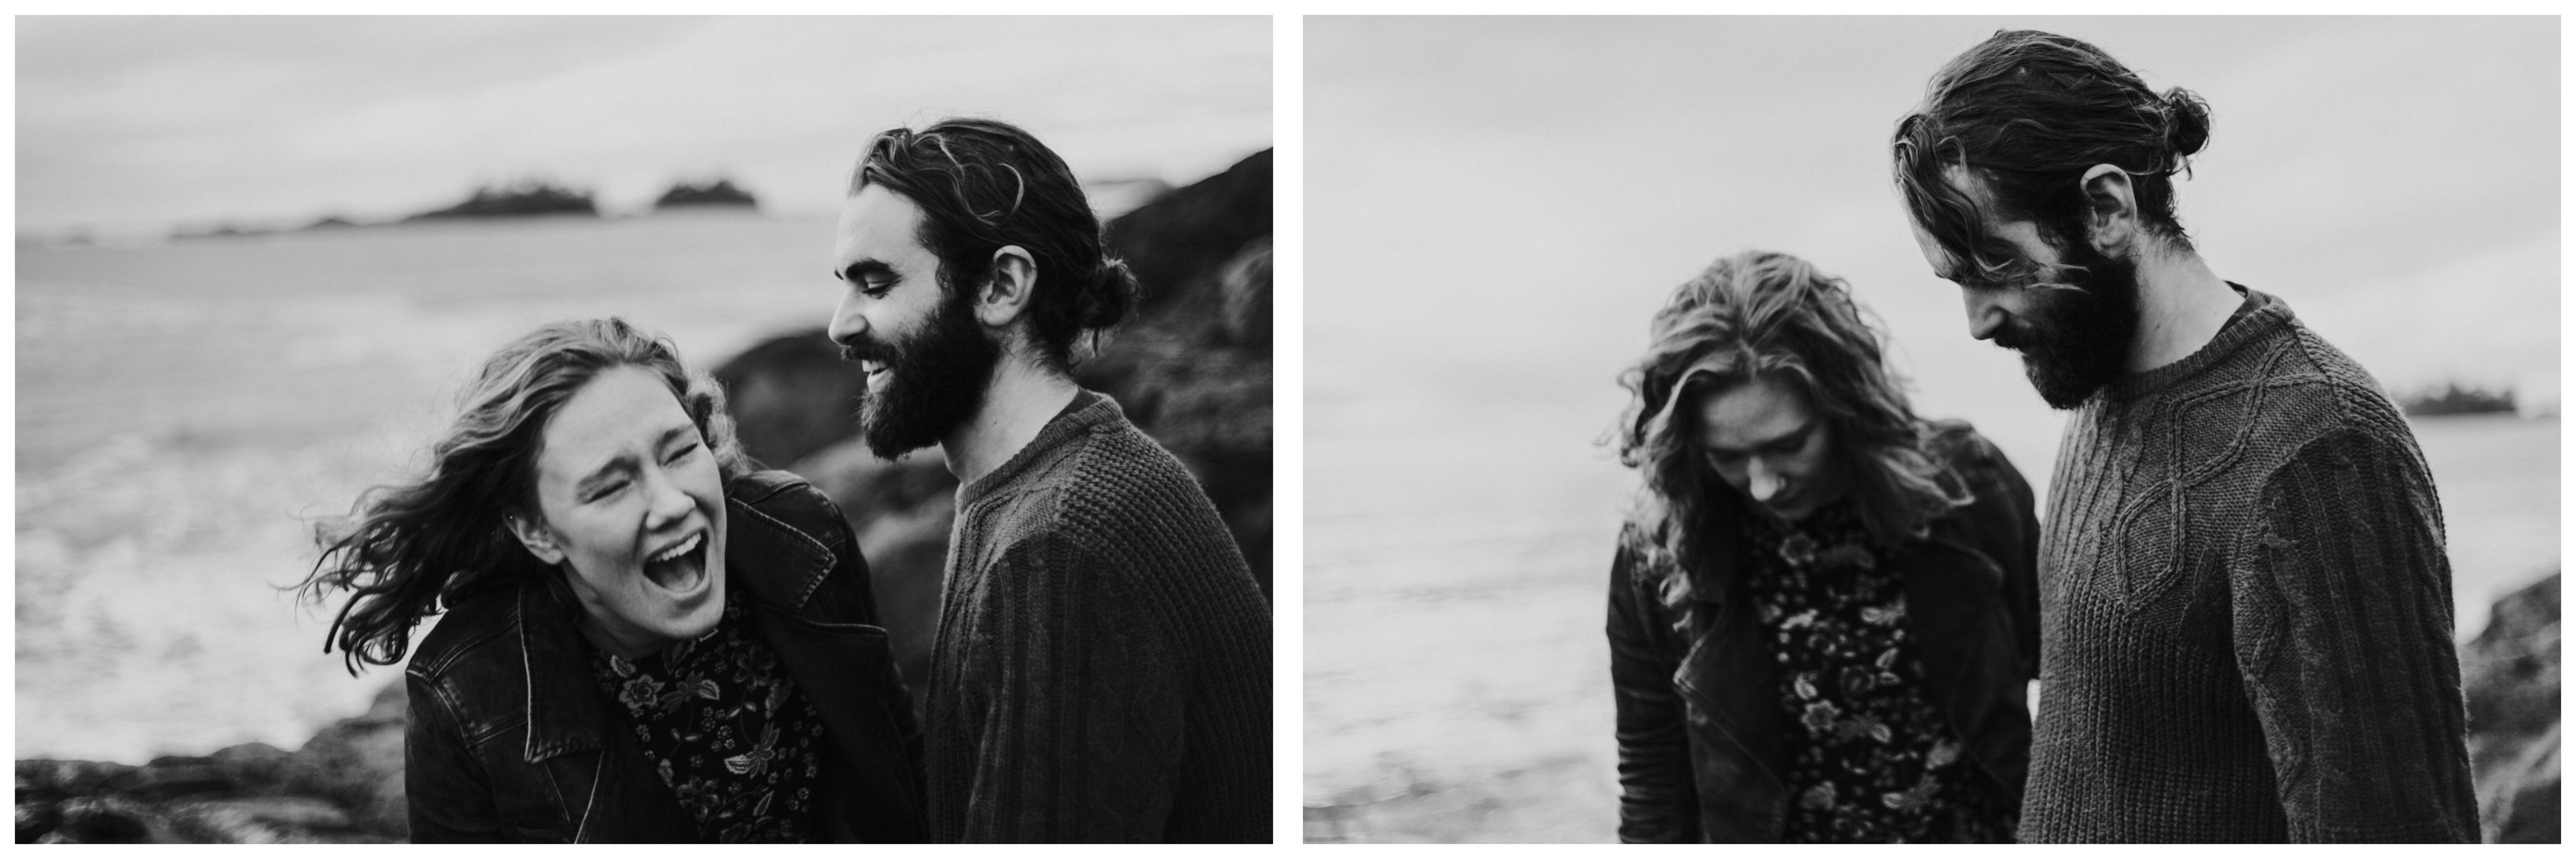 Tofino wedding photographer for a destination engagement photography session on Vancouver Island, BC - Image 24